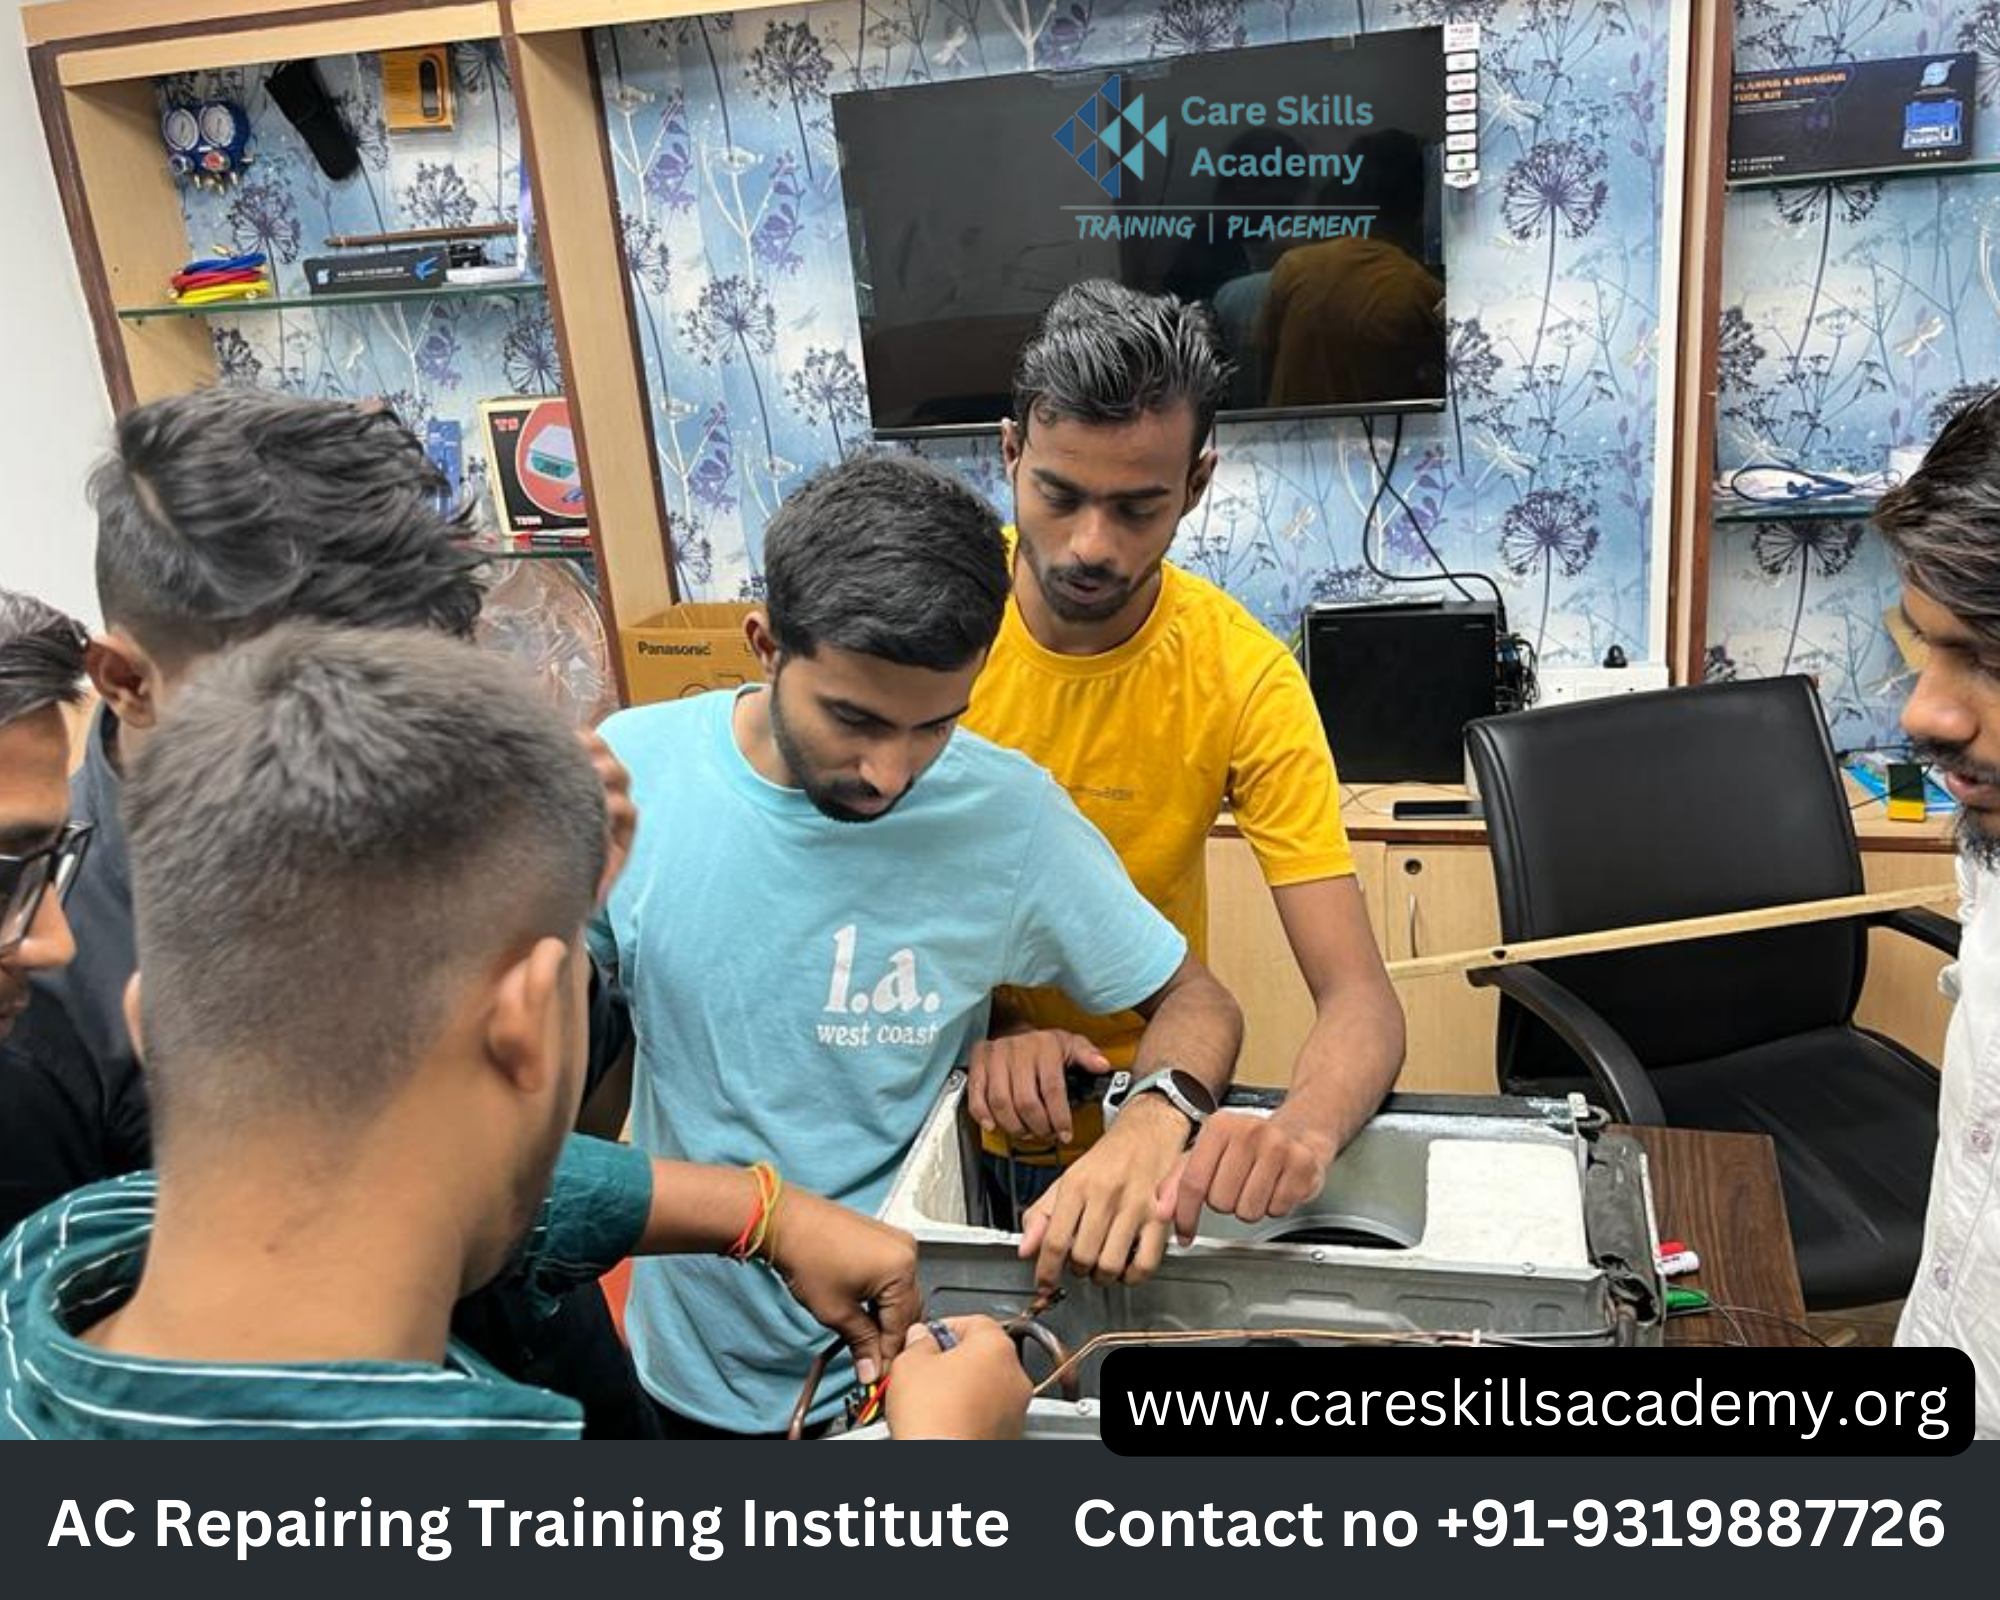 Enroll now at Care Skills Academy in Delhi That Offers an AC Repairing Course in Hindi